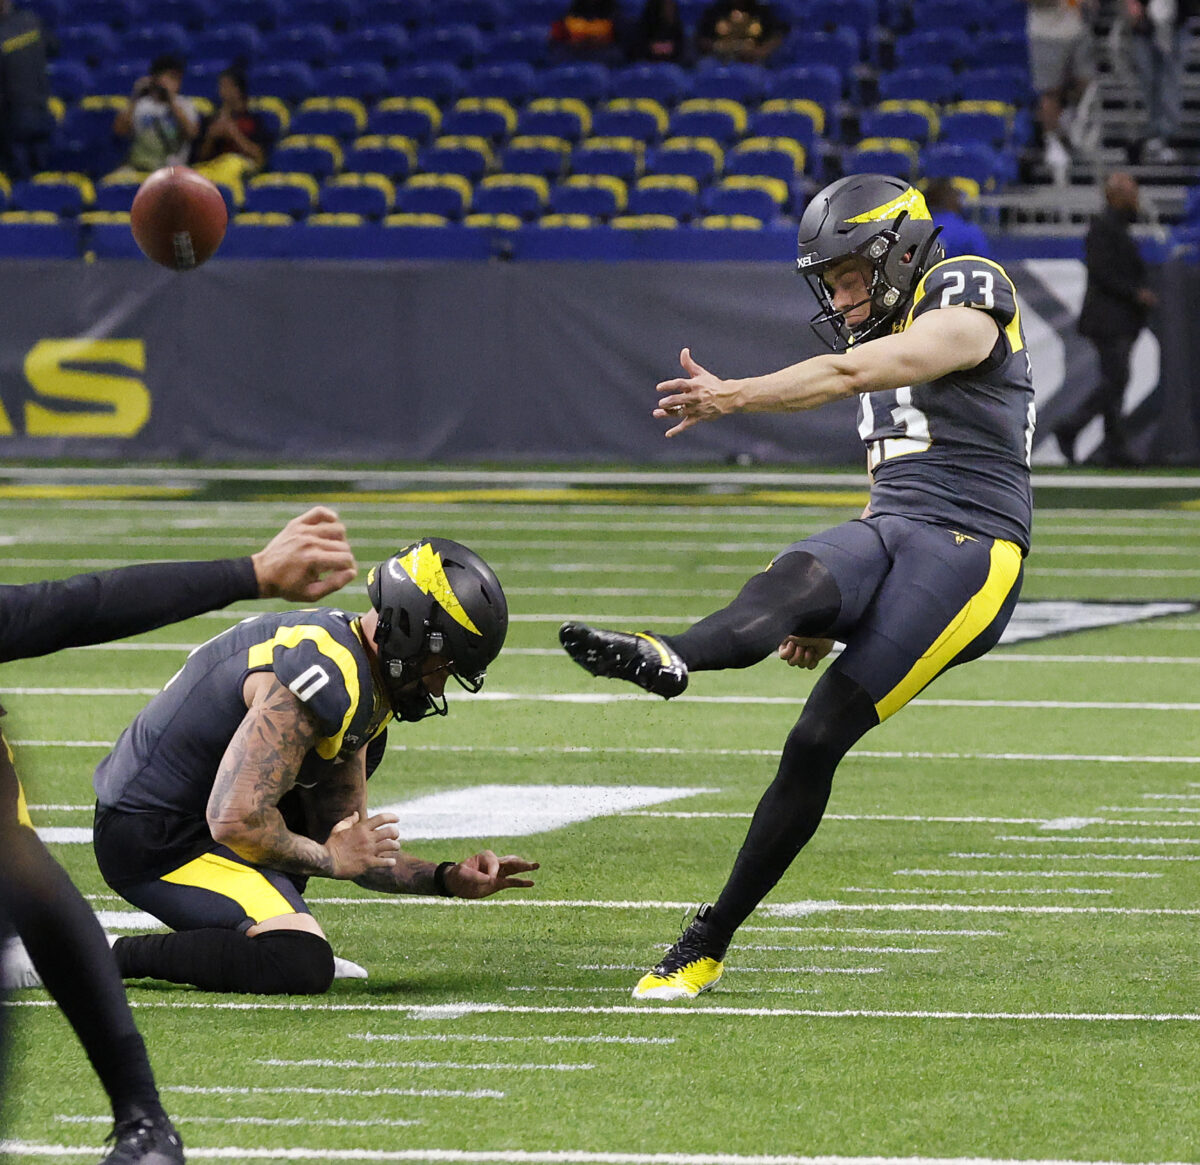 The Lions are bringing in an XFL kicker for rookie minicamp tryout